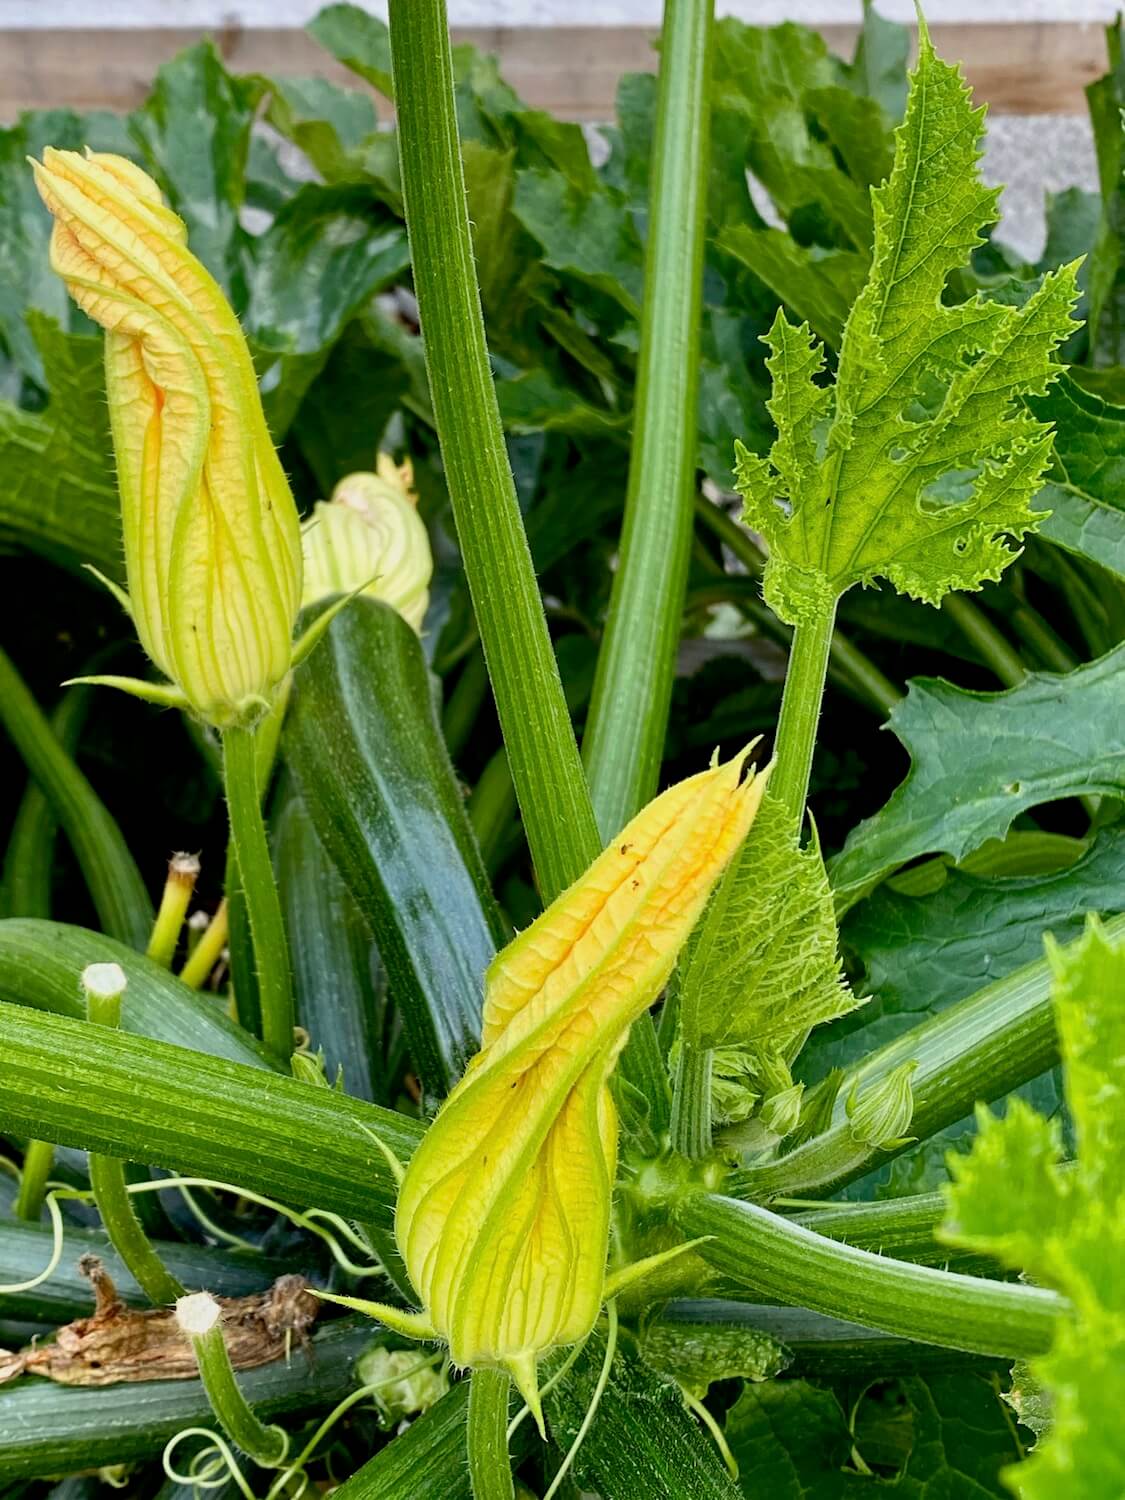 Zucchini blossoms bloom large and proud in the middle of this Seattle P-Patch garden. The two blooms are still tight together in a yellow with green veined flowers while an infant zucchini fruit is taking life int he background amongst the dark green, prickly leaves.